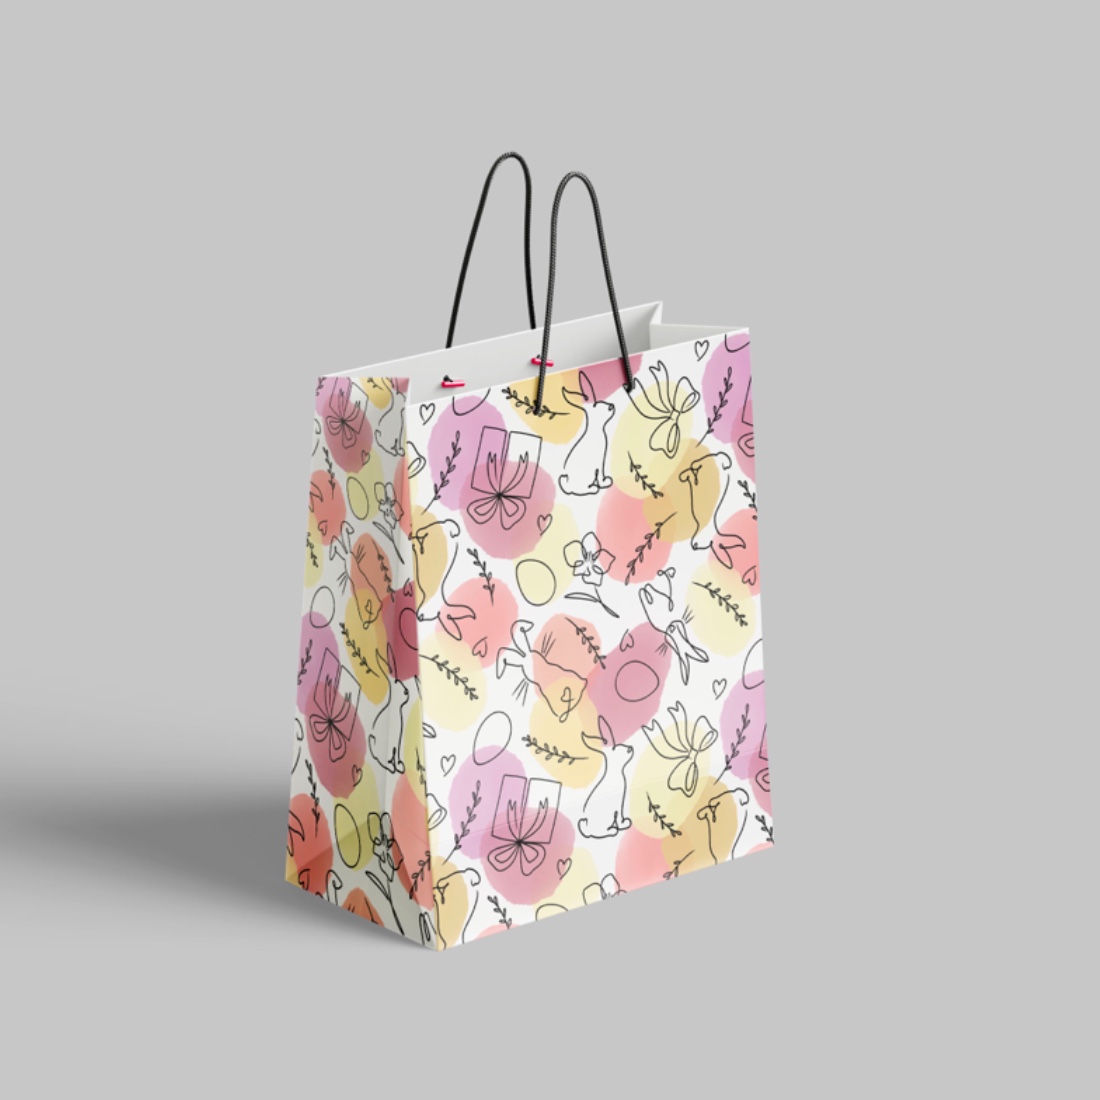 Shopping bag with a flower pattern on it.